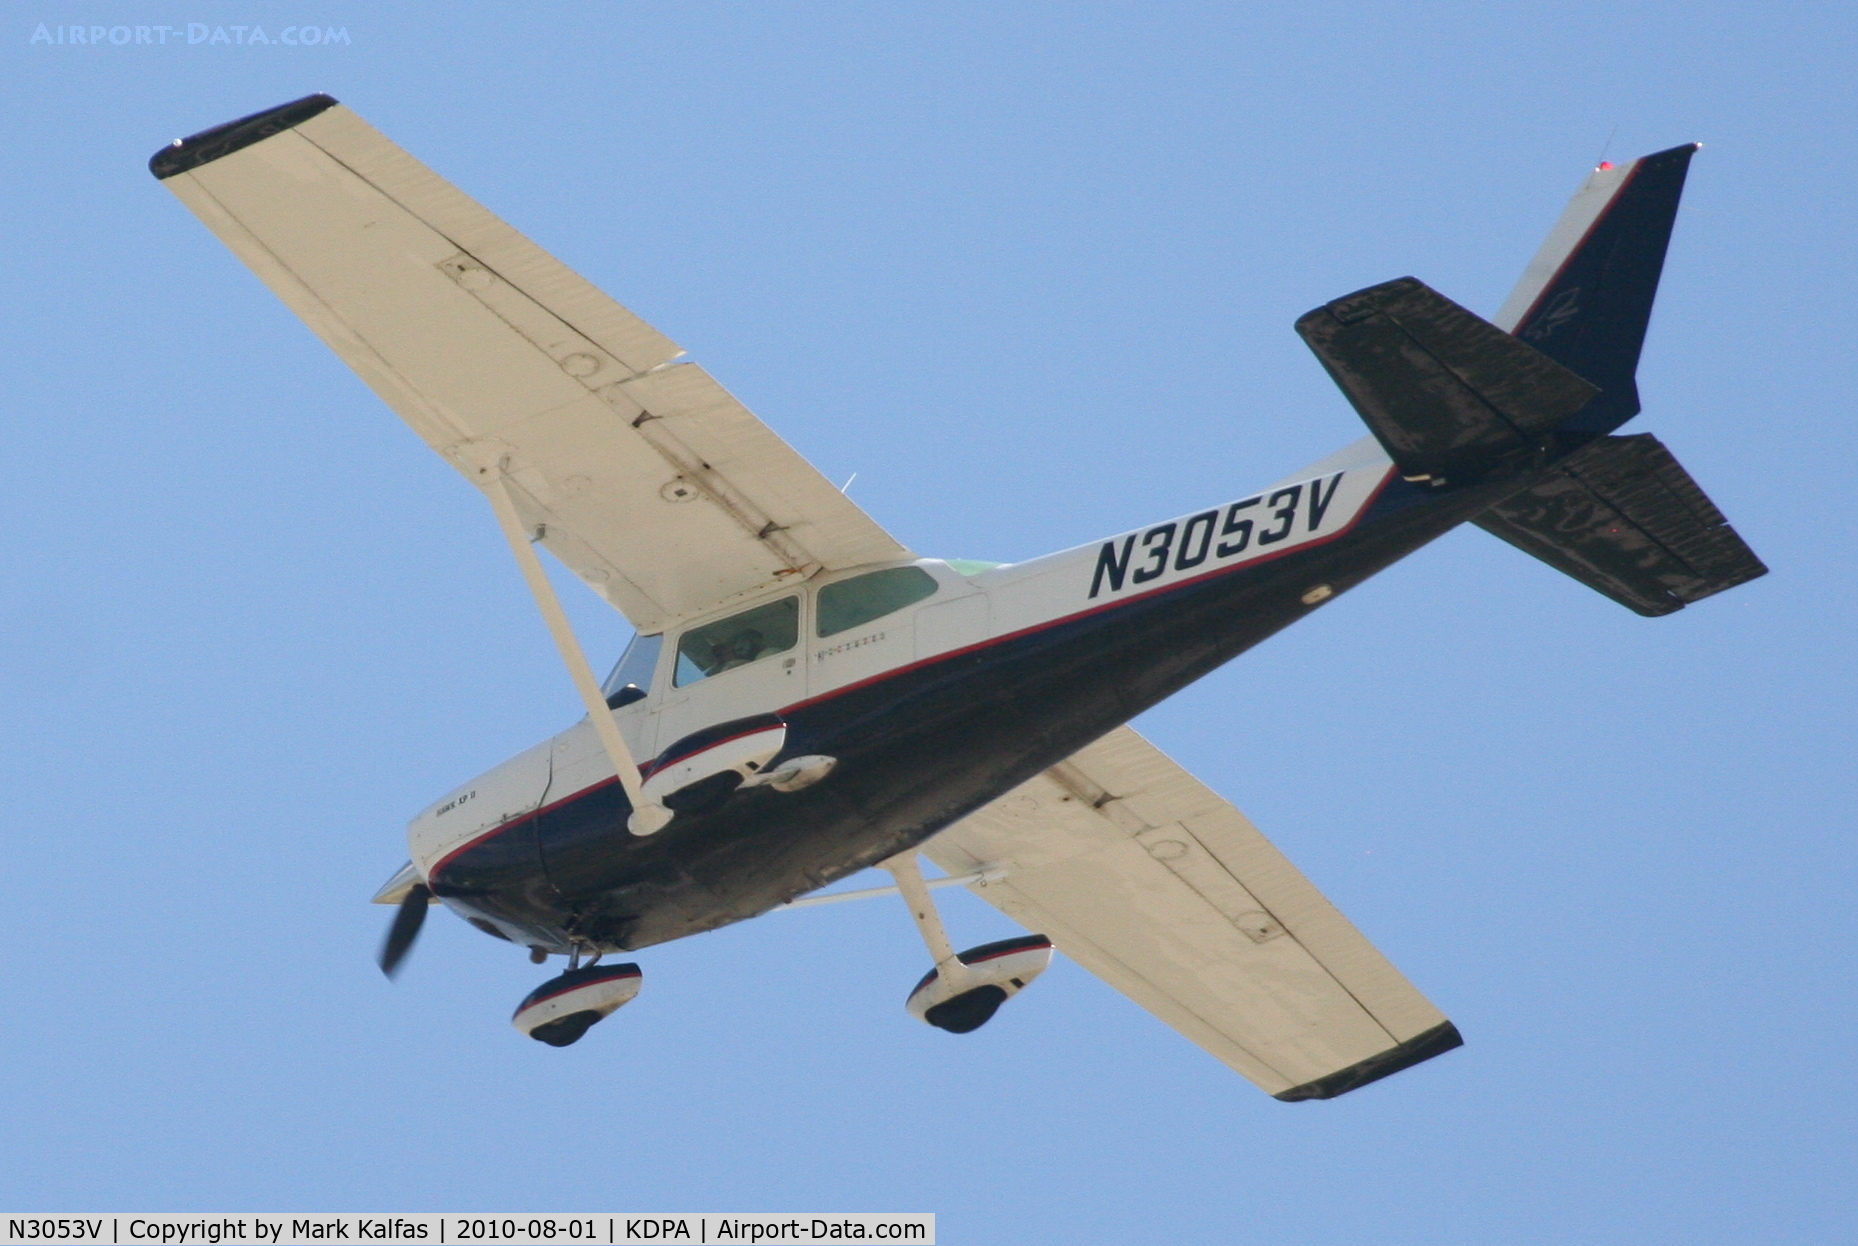 N3053V, 1977 Cessna R172K Hawk XP C/N R1722238, Cessna R172K N3053V mid-field transition for downwind 20R KDPA.